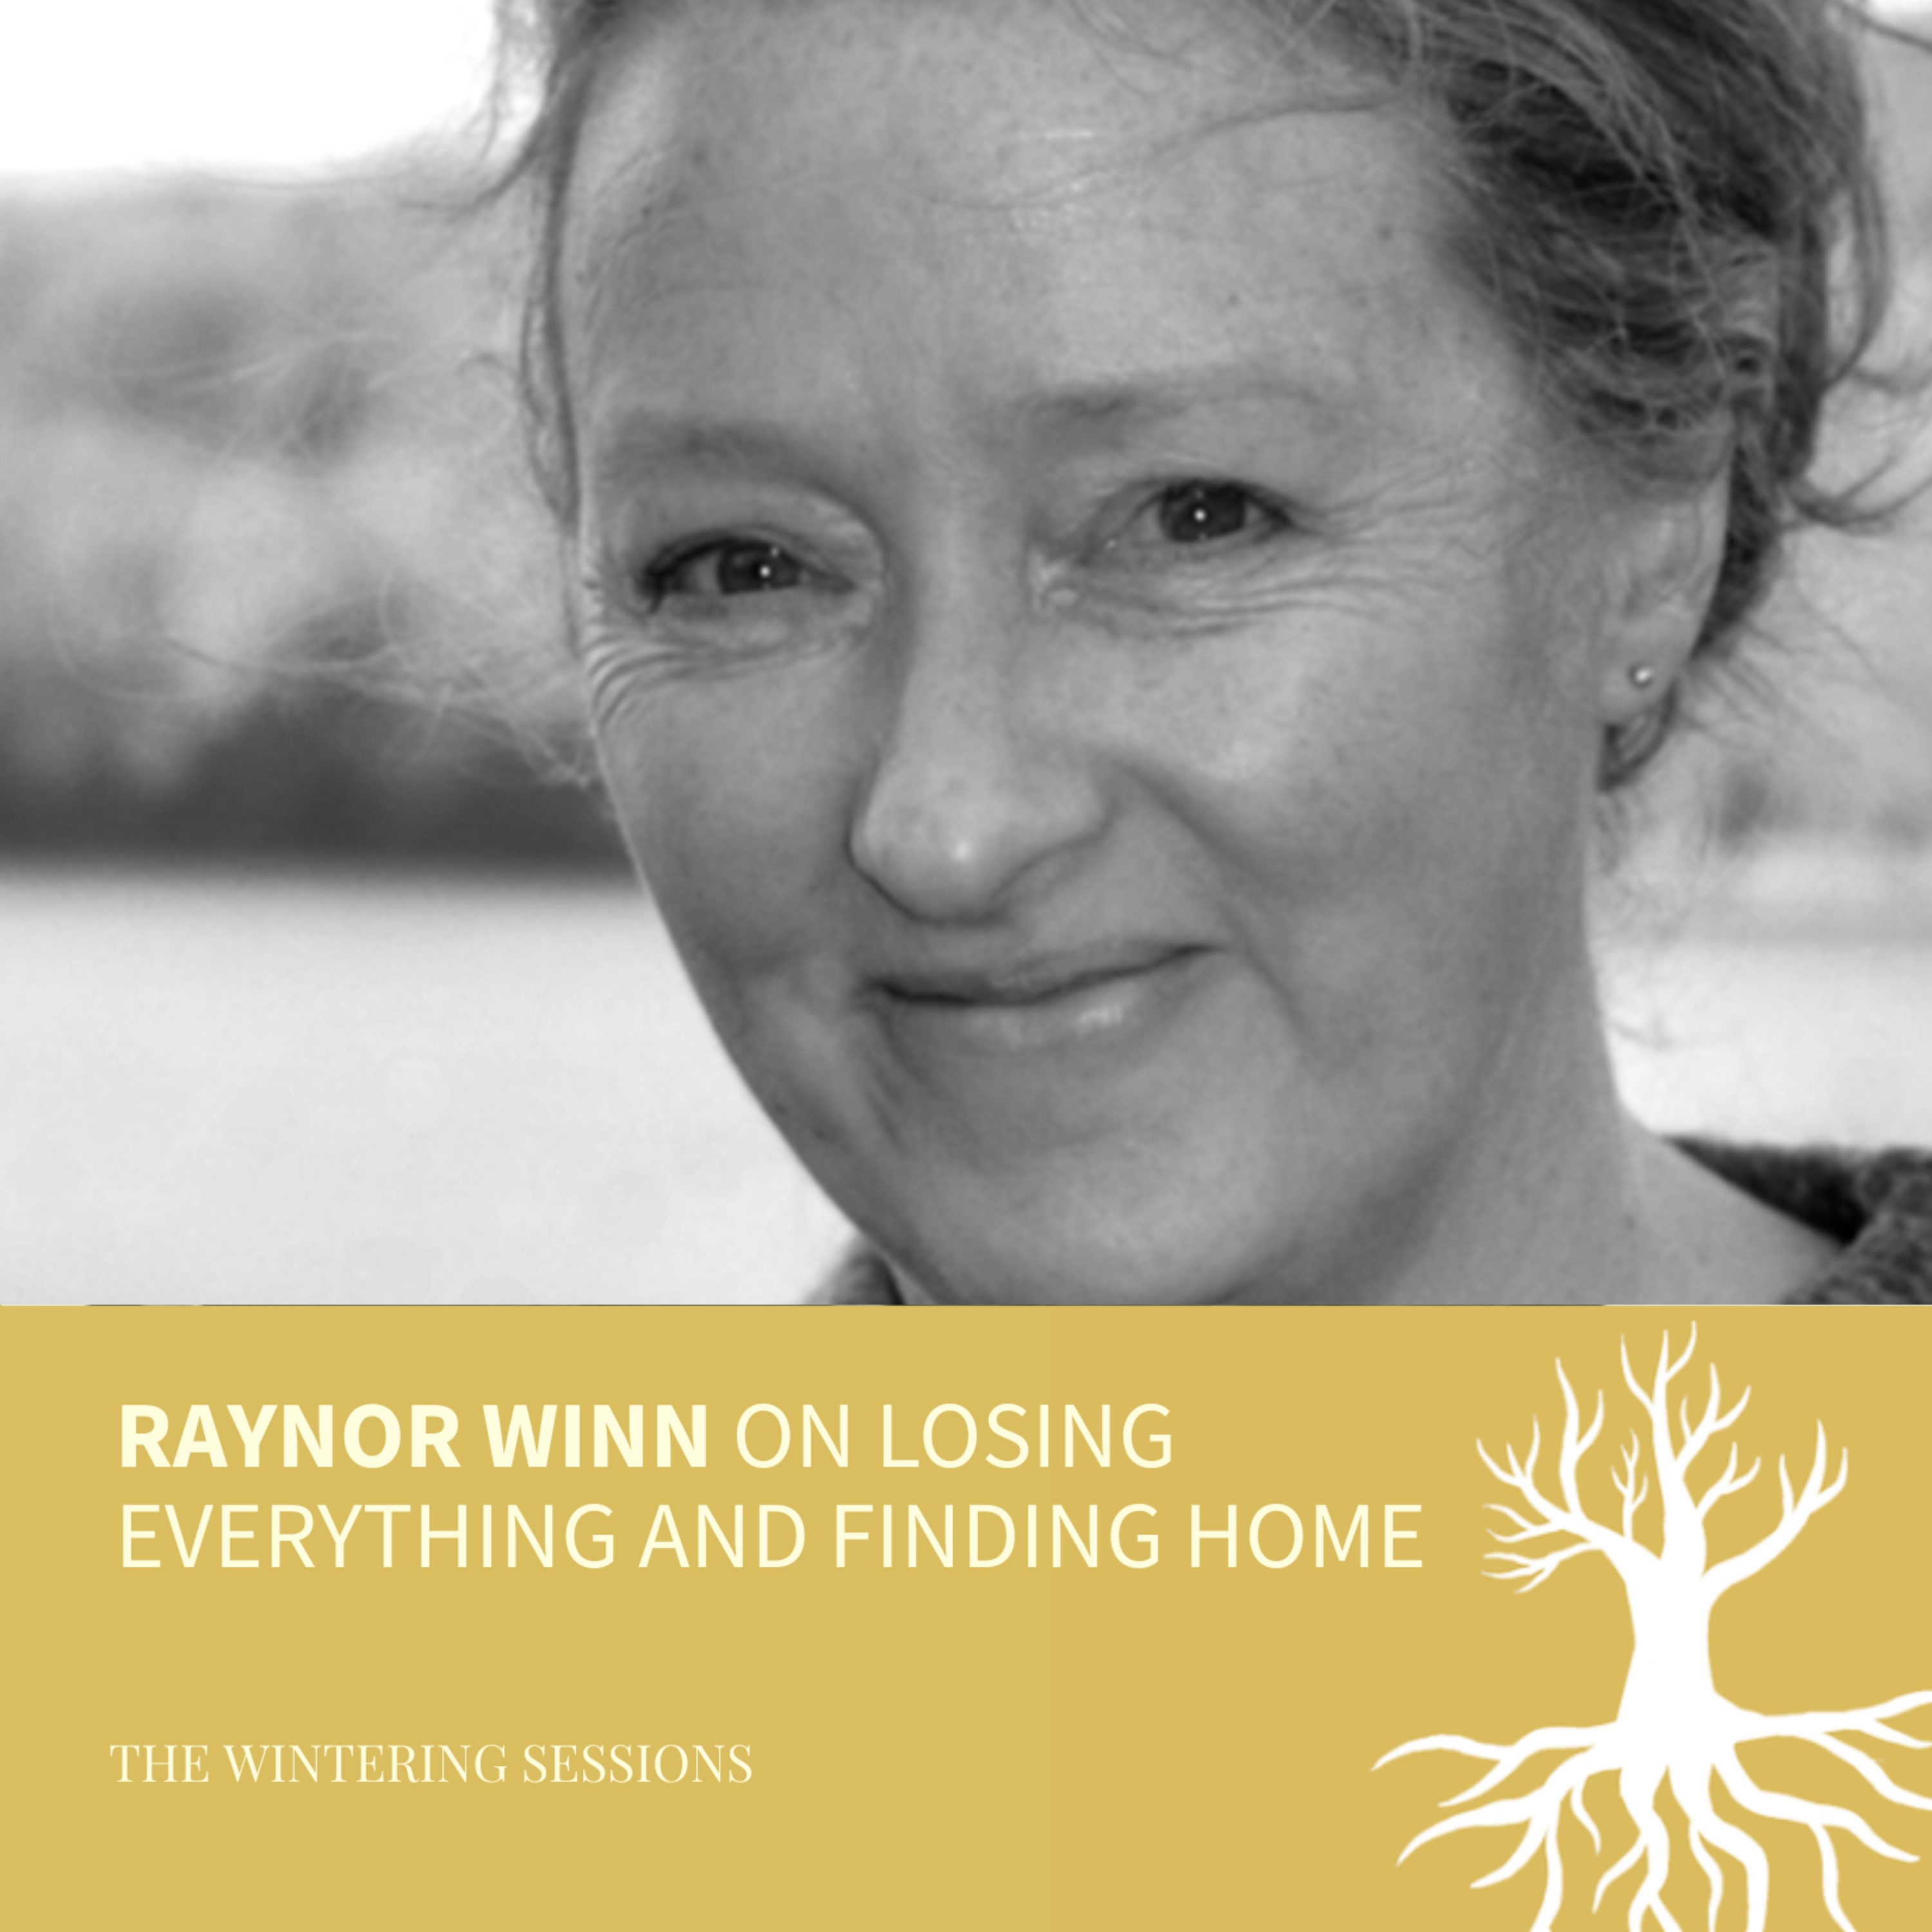 Raynor Winn on losing everything and finding home